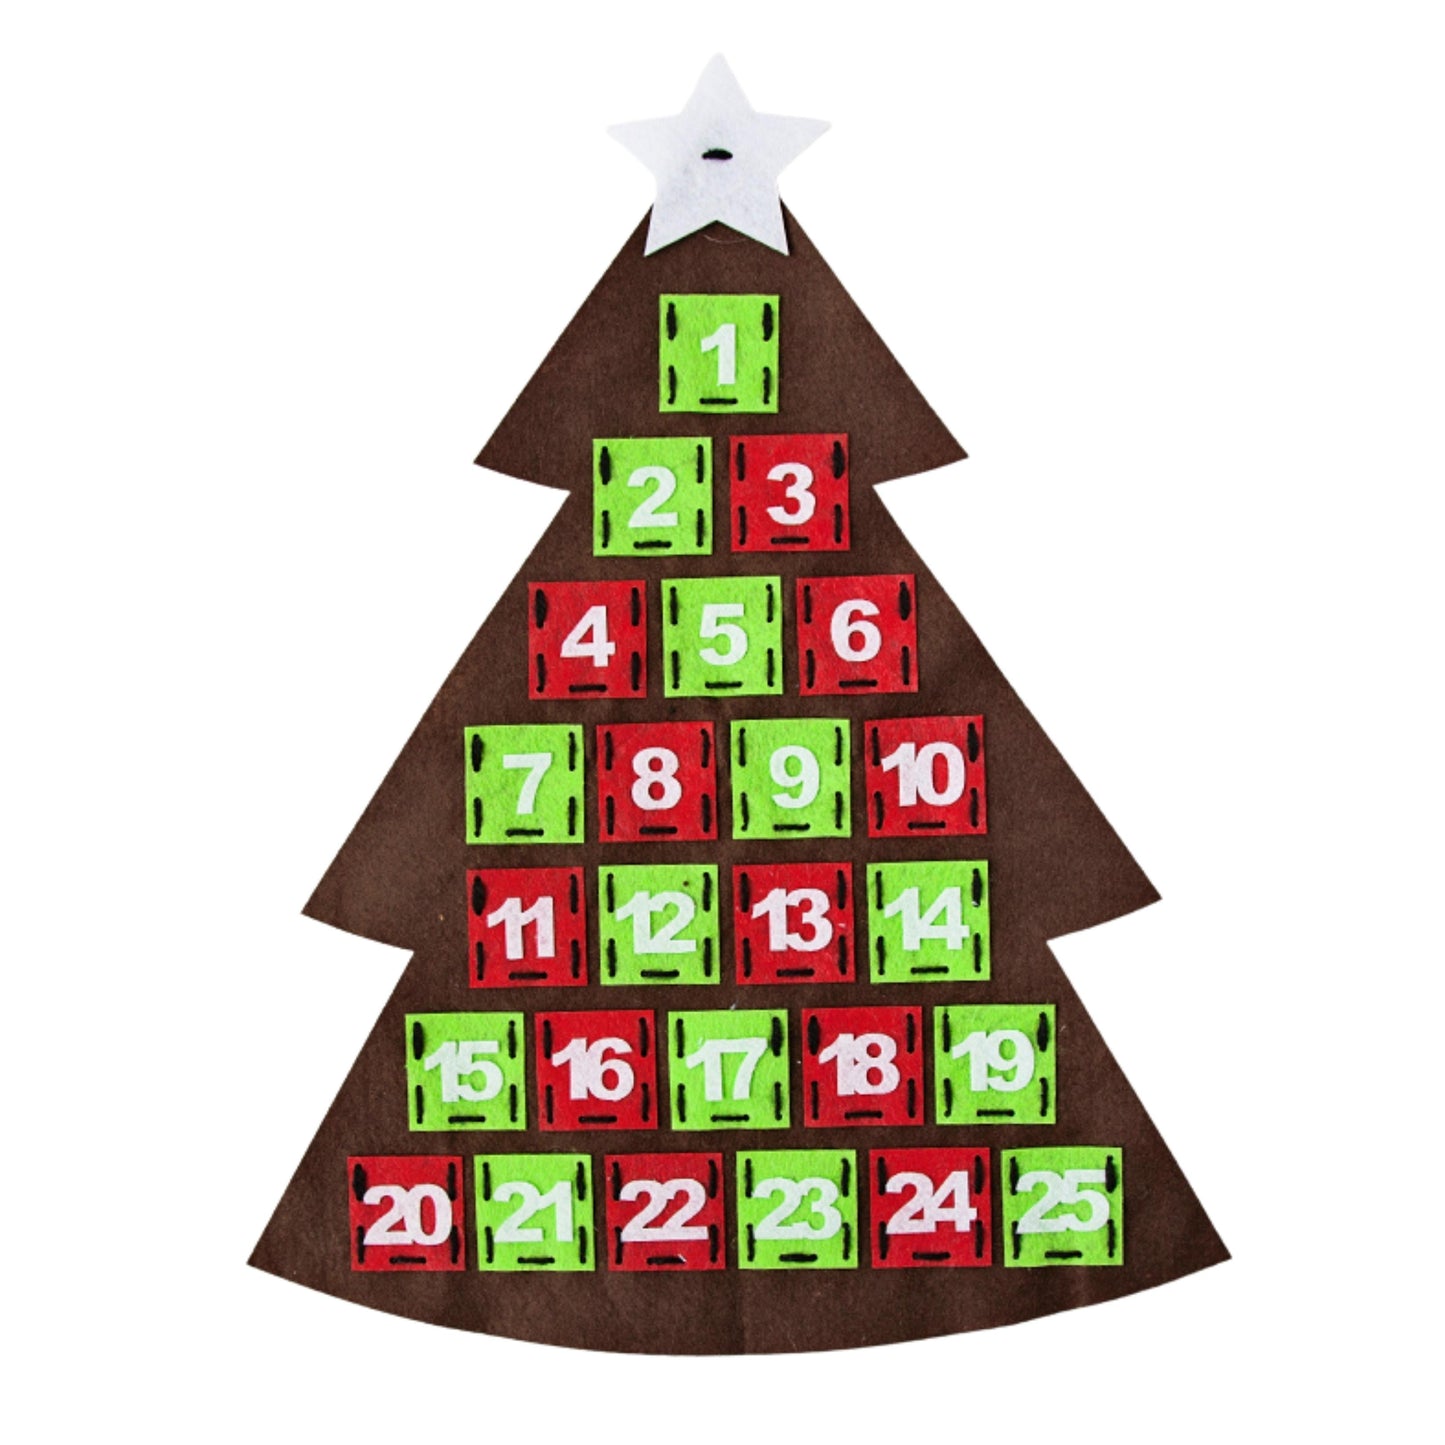 Make Your Own Advent Calendar with Little Pockets